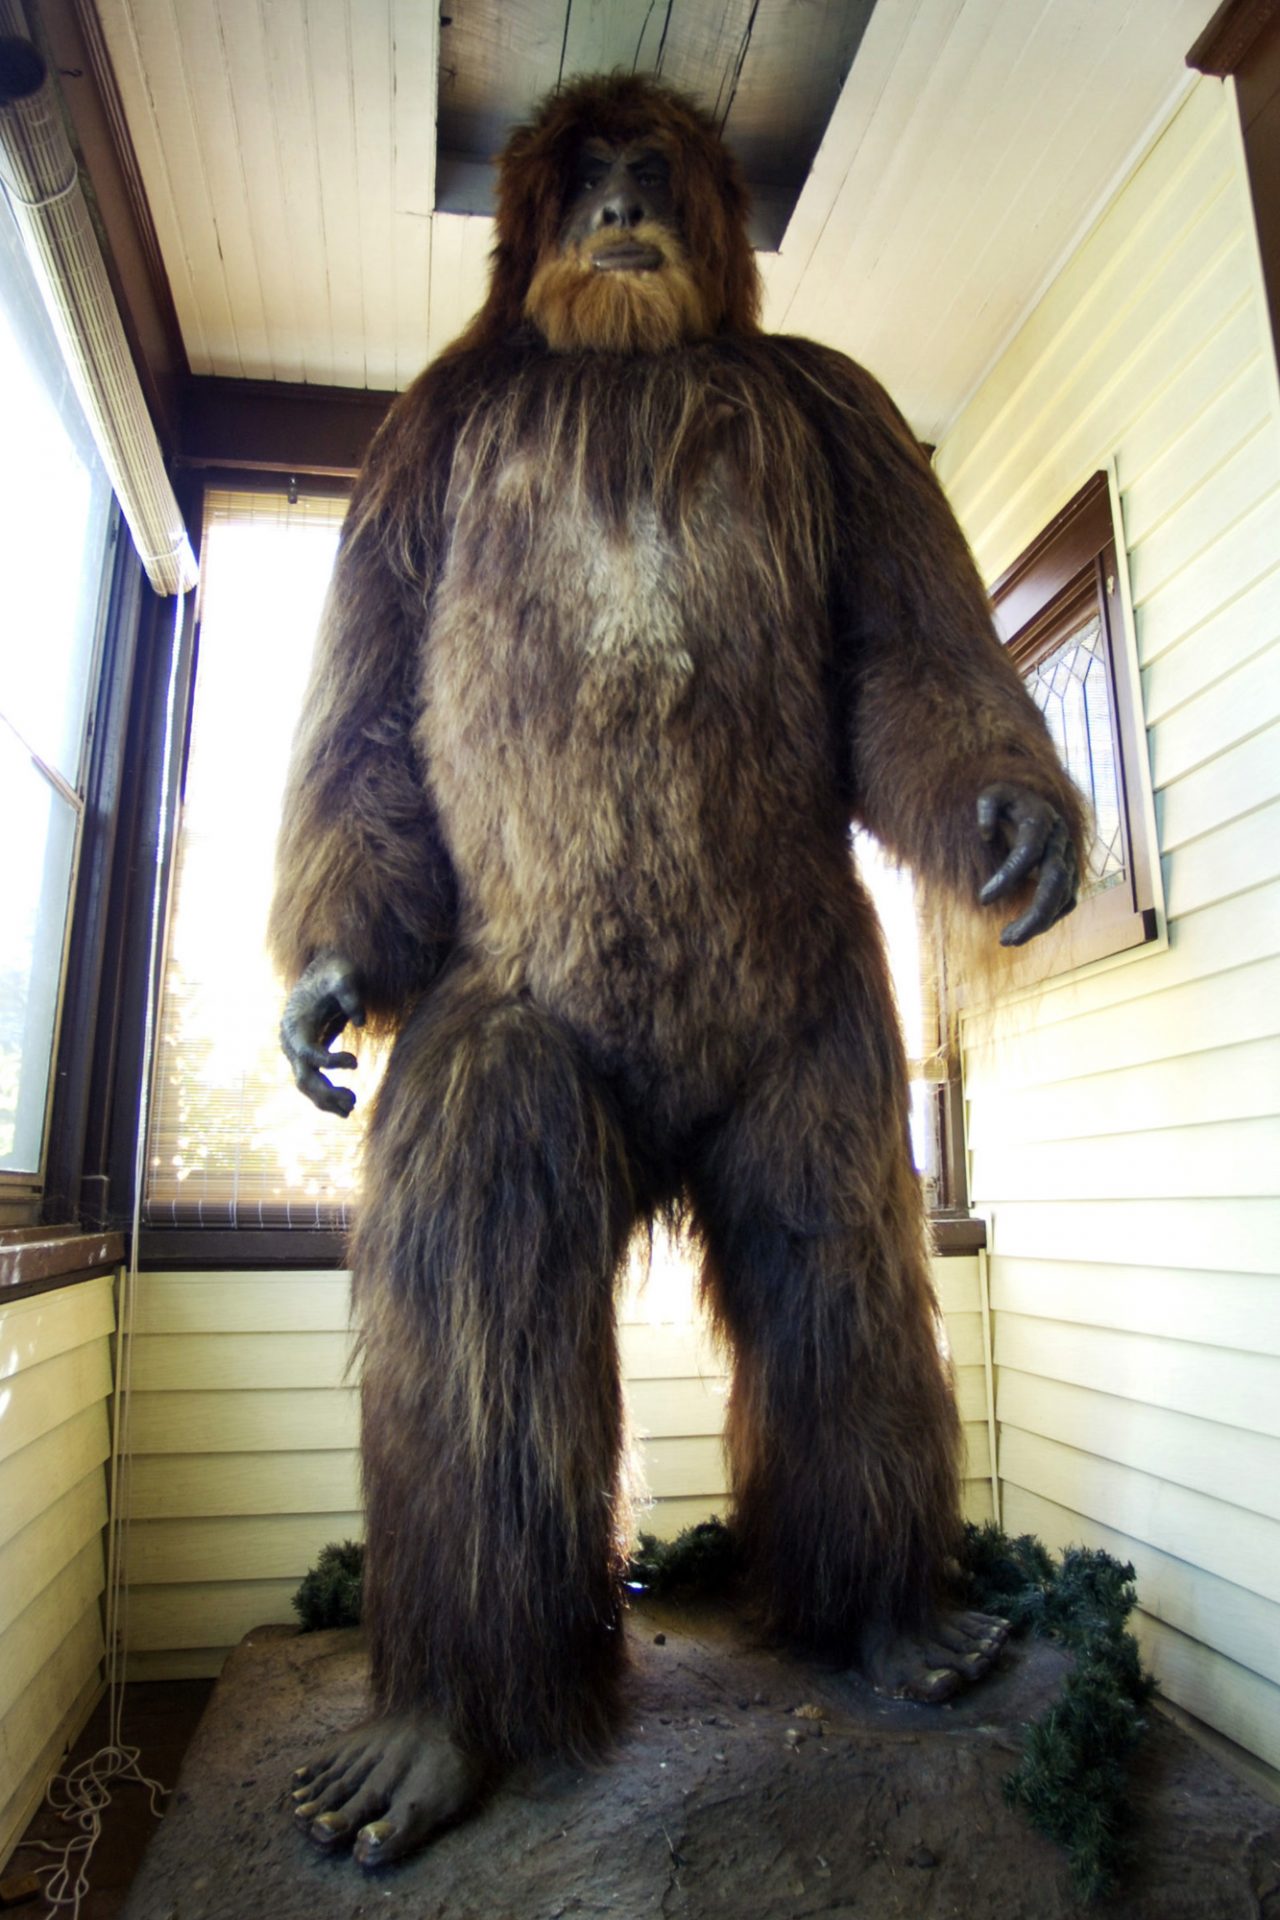 <p>The American version of the yeti, the Bigfoot, is more of the same: a legend of a cross between a bear and a gorilla that lives in the forests of North America.</p>